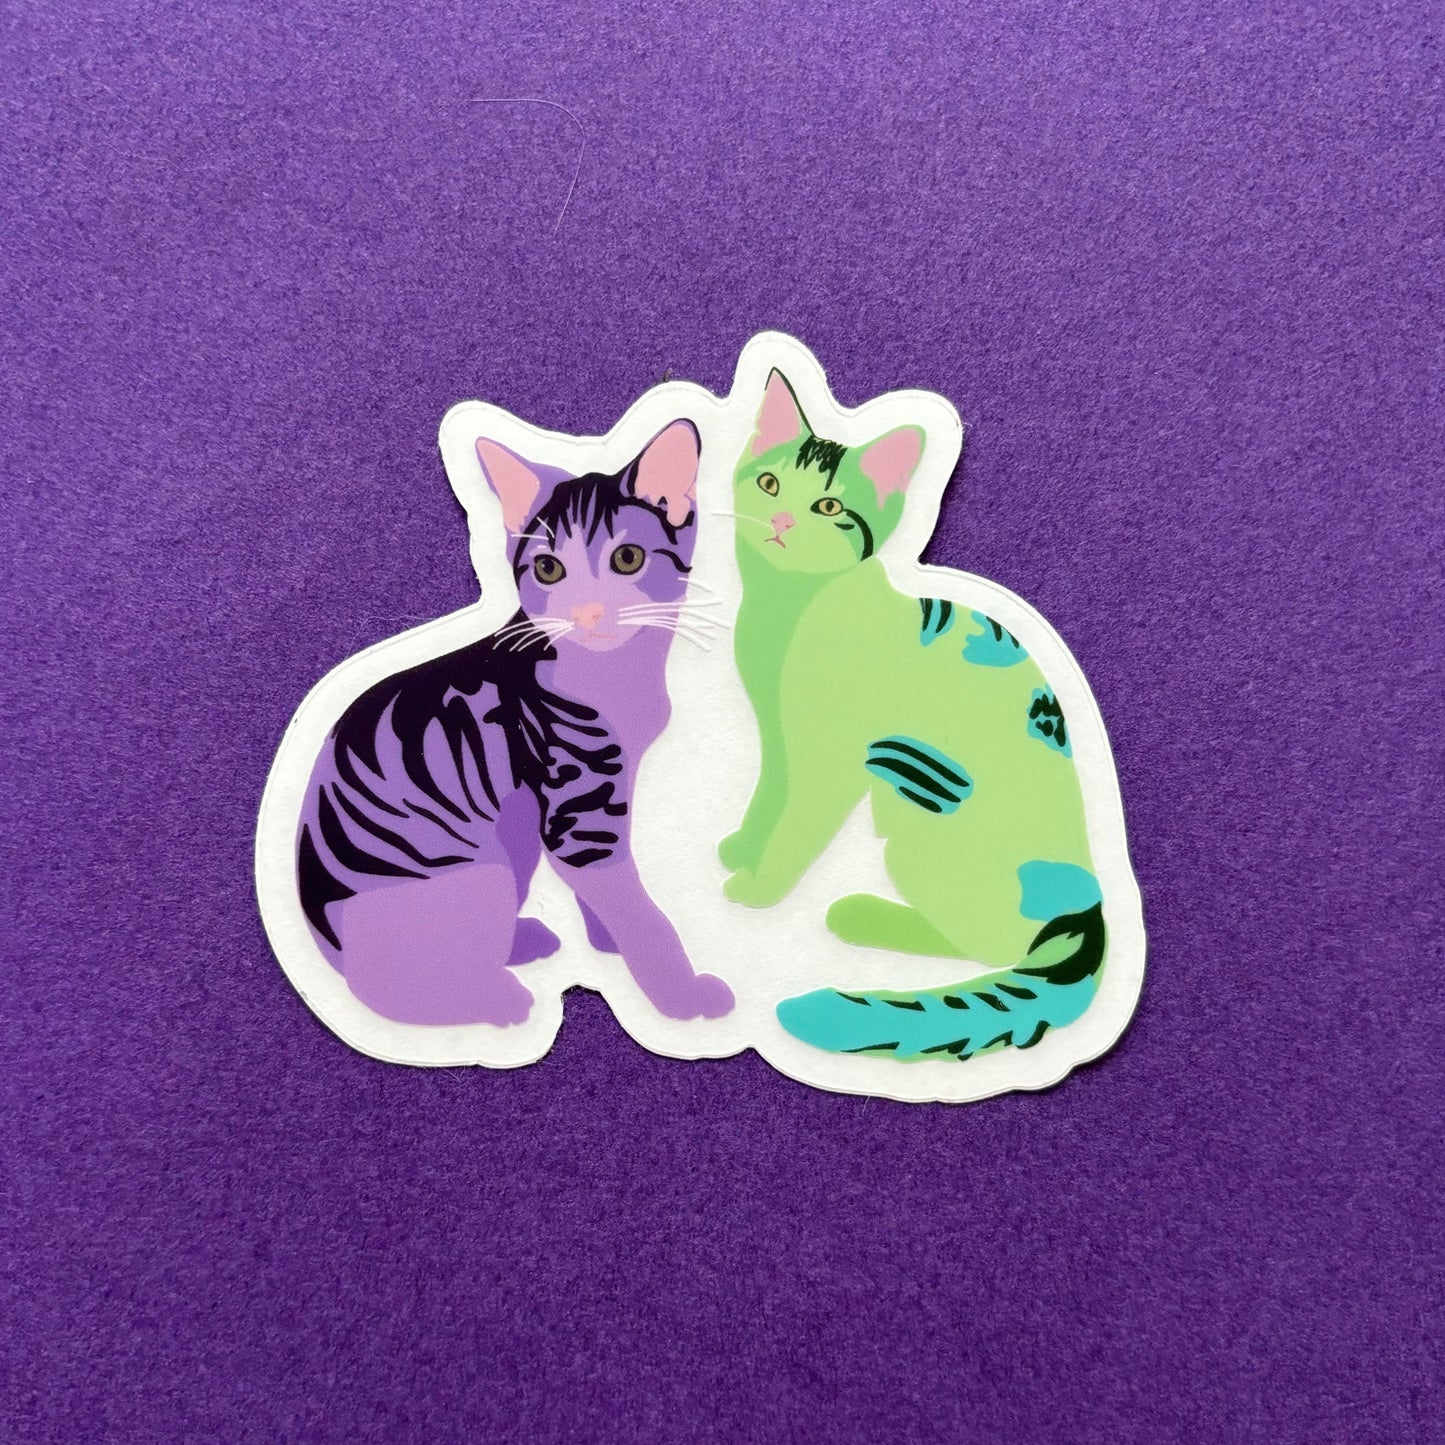 Frog and Toad are Tiny Baby Kittens Clear Vinyl Sticker